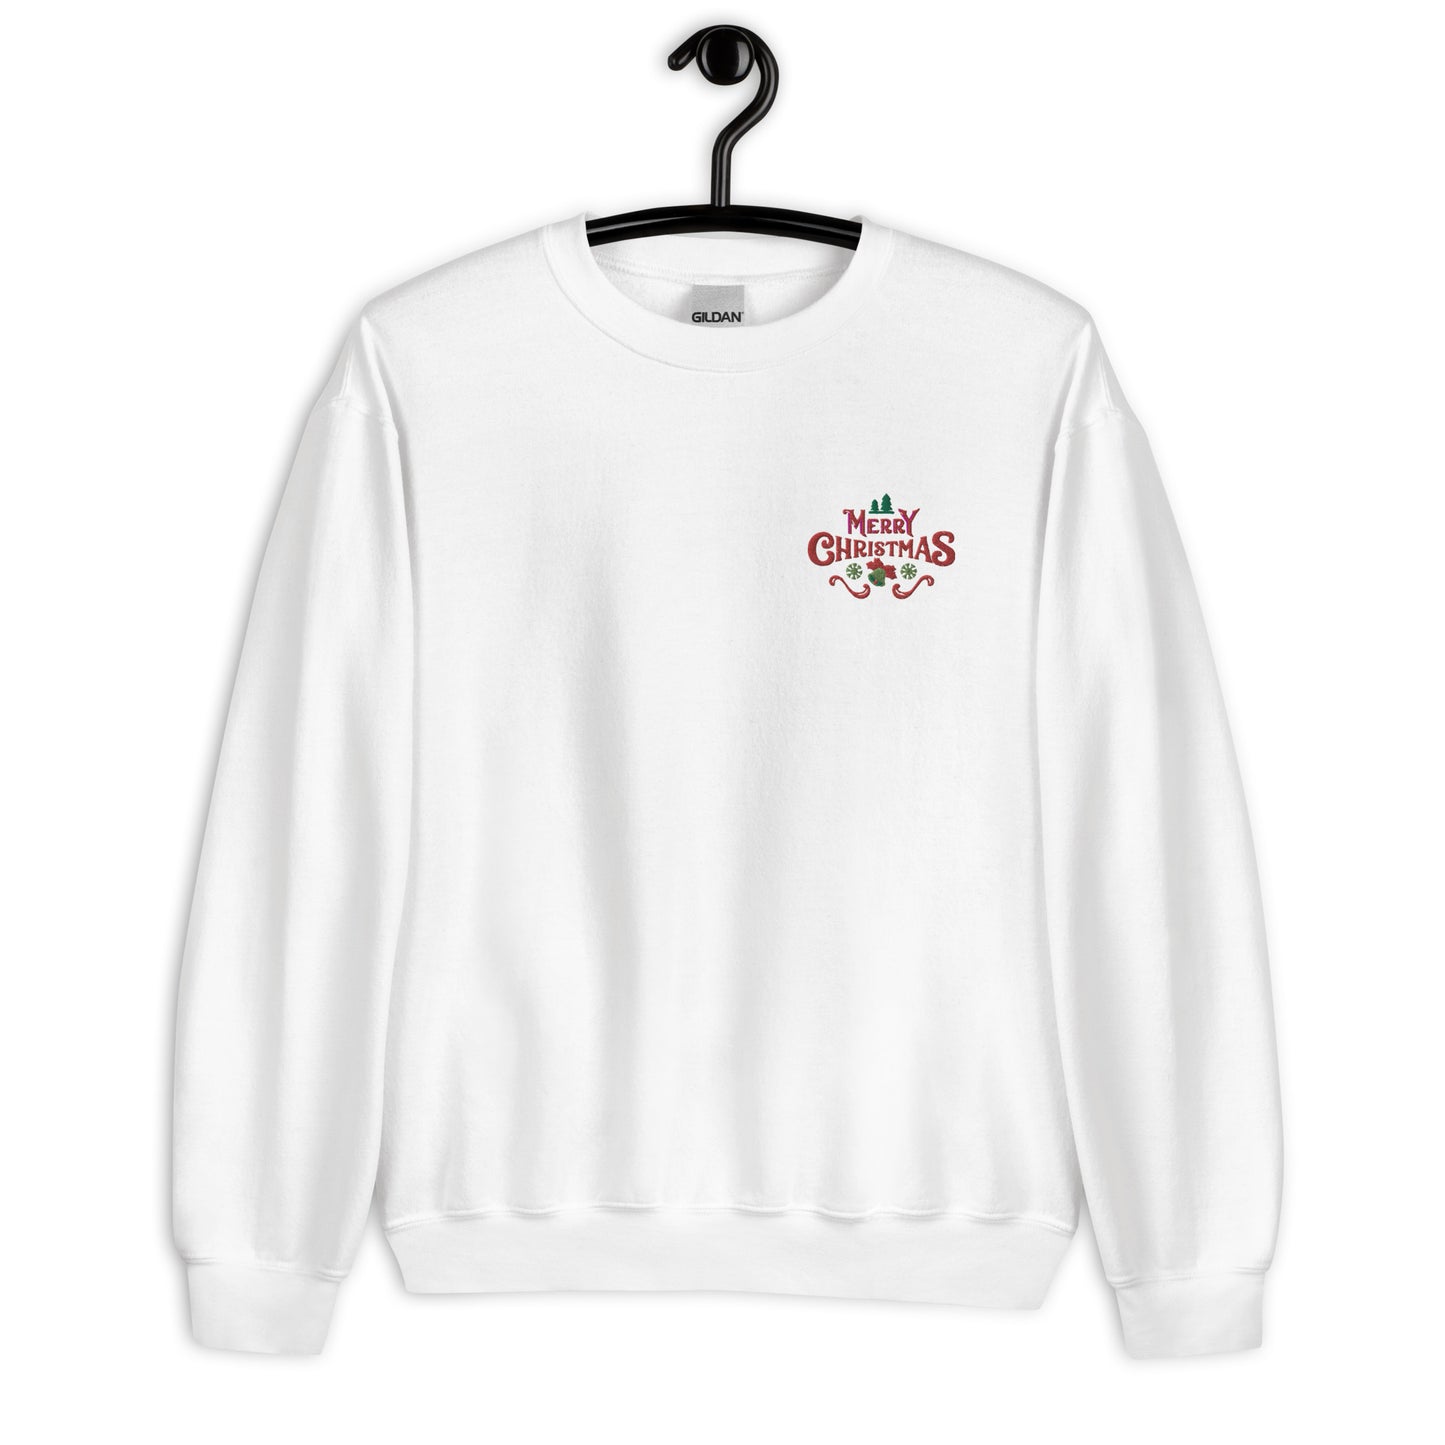 Merry Christmas Embroidered Sweatshirt, Holidays Graphic Crewneck Fleece Cotton Sweater Pullover Men Women Aesthetic Top Starcove Fashion